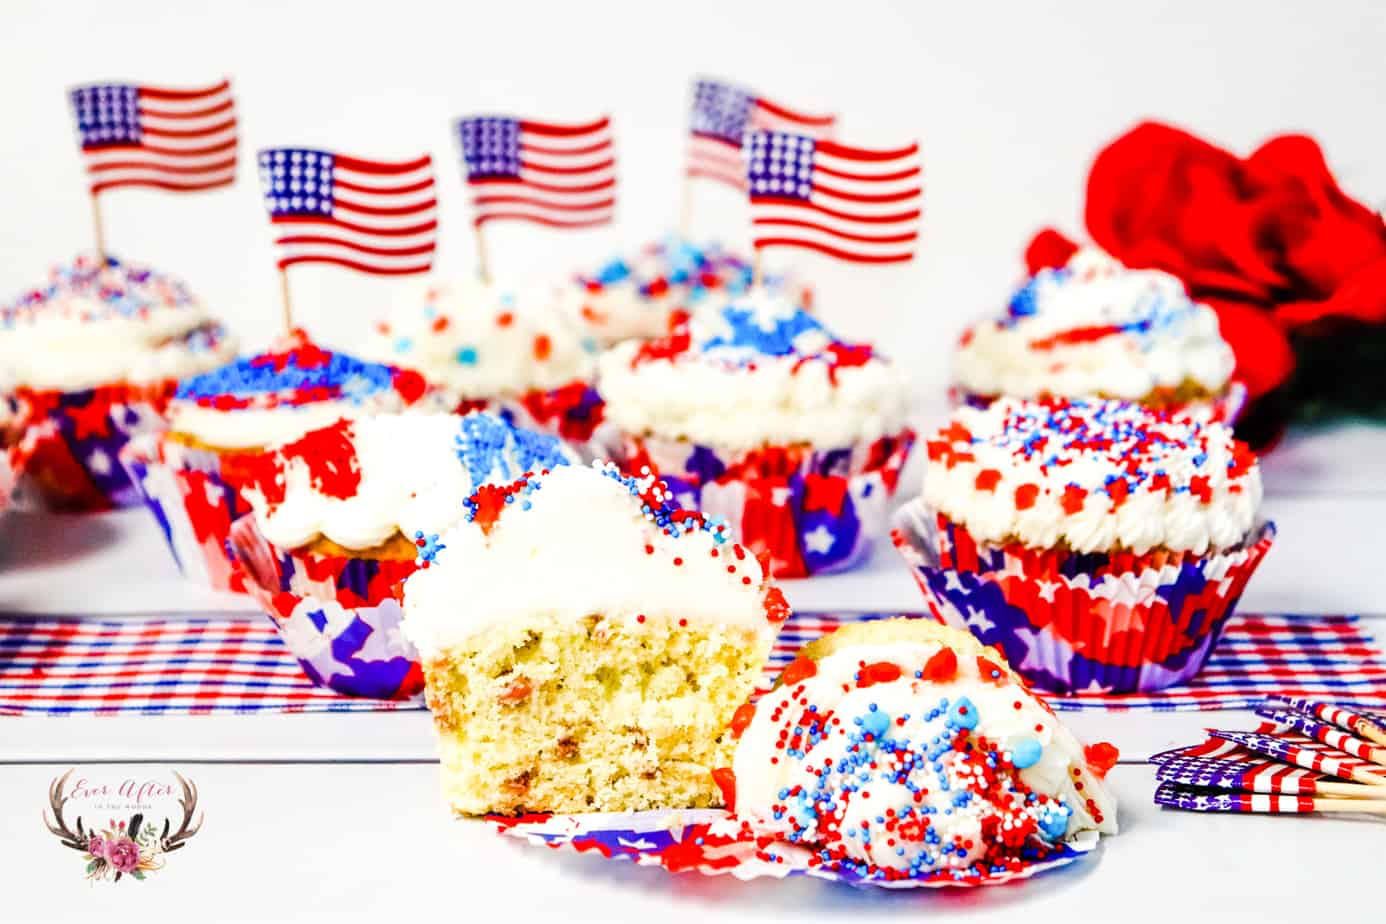 Red, White & Blue Cupcakes are perfect for Memorial Day and Fourth of July parties.